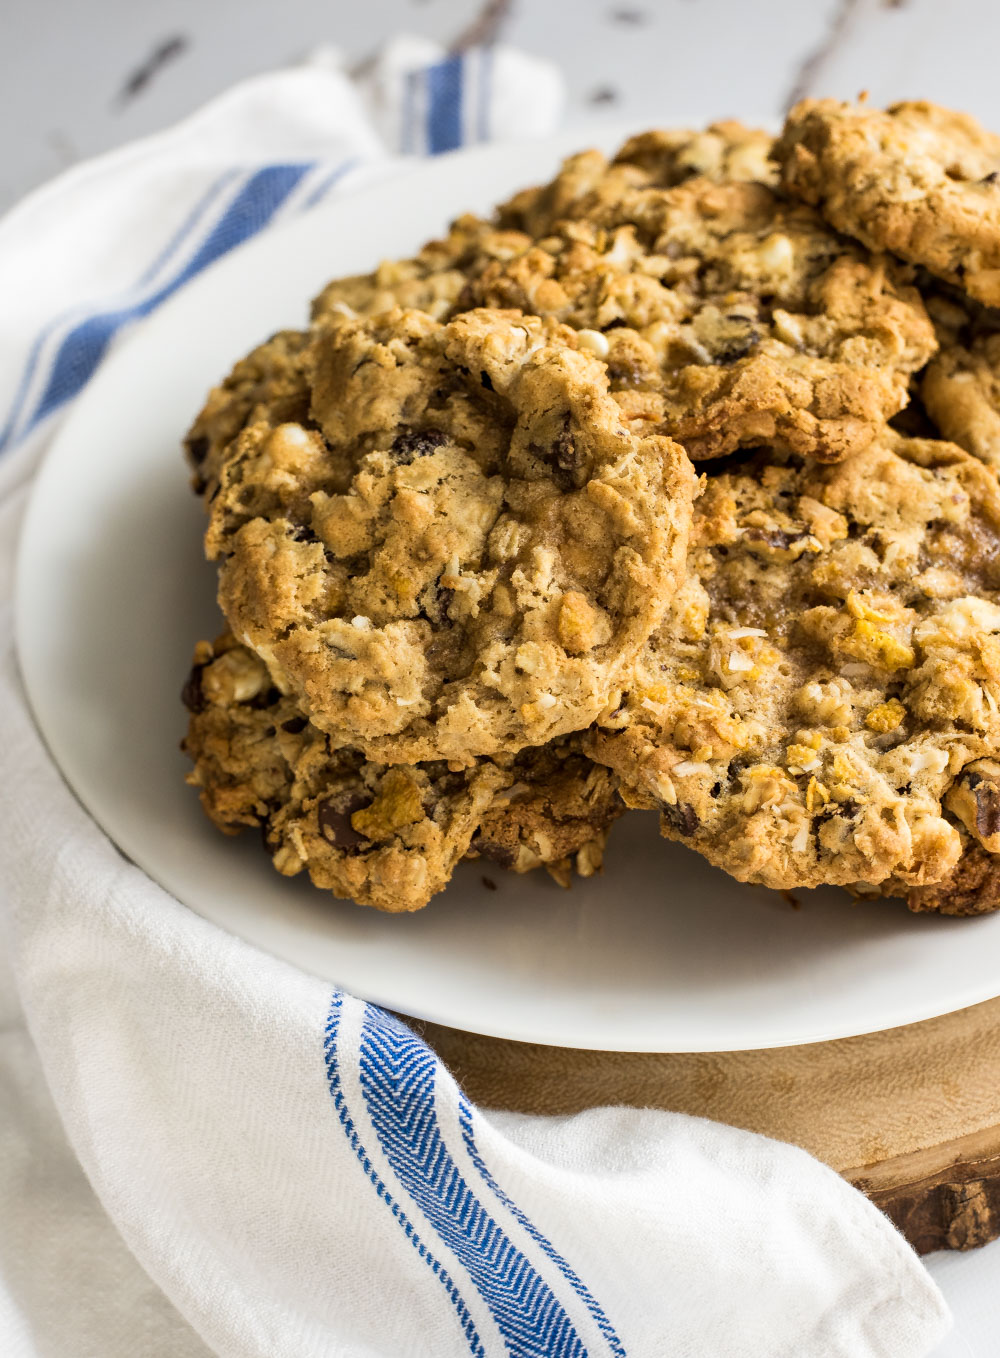 If you are looking for a loaded chocolate chip/oatmeal cookie, these Wyoming cowboy cookies are for you! You won't be able to have just one!